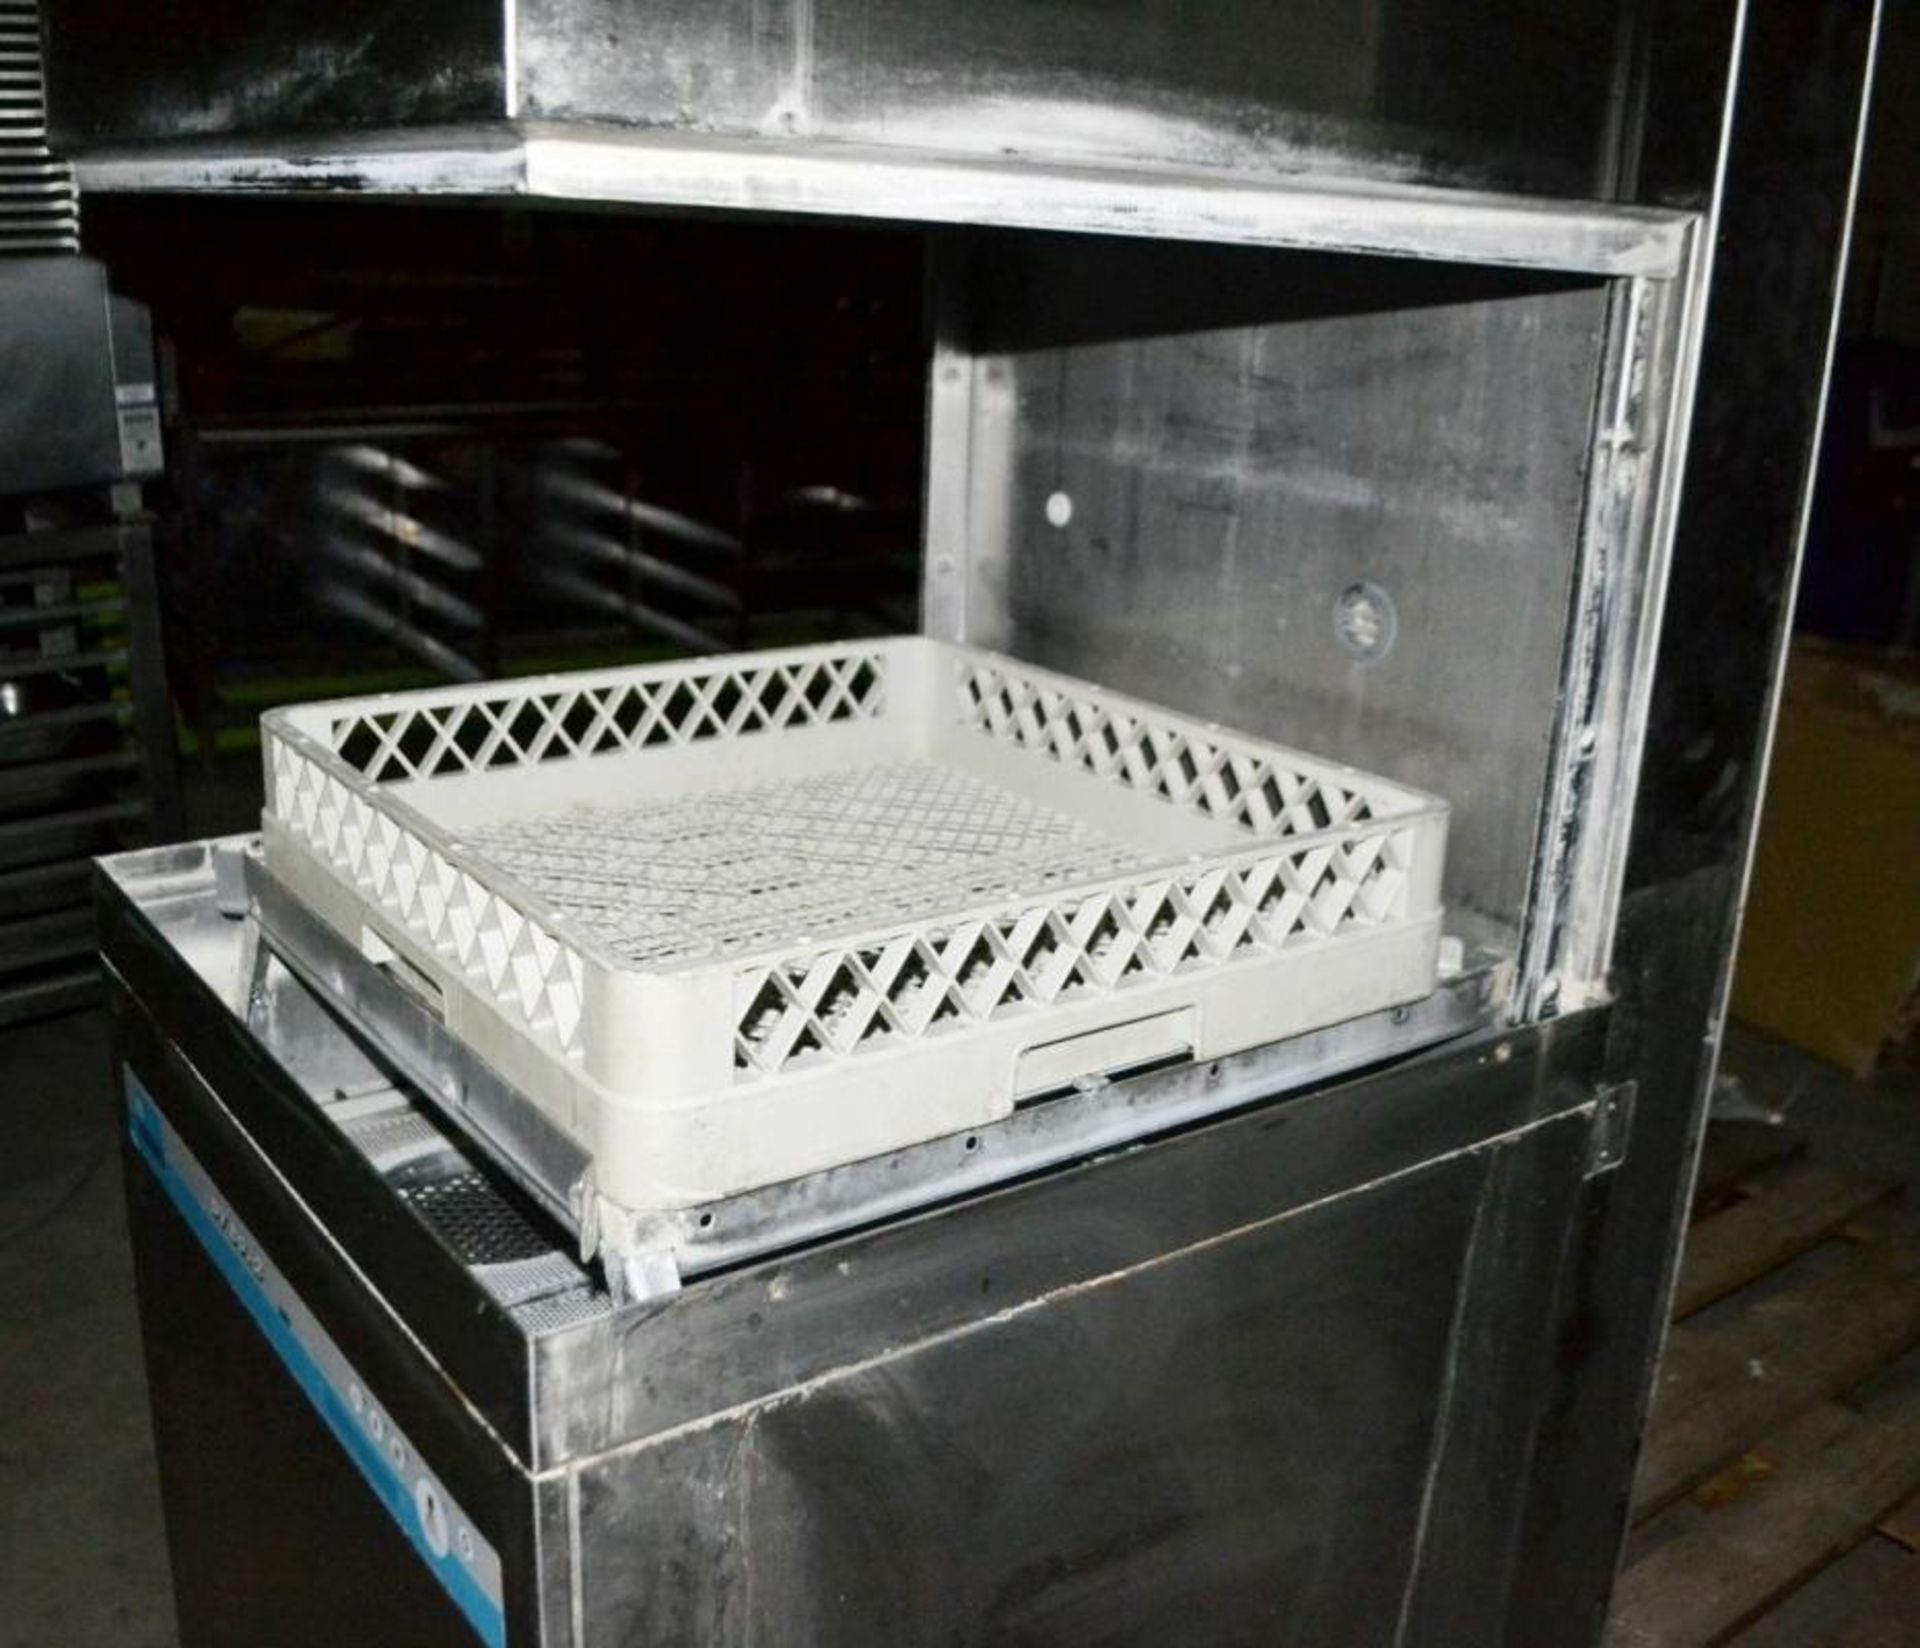 1 x MEIKO DV80.2 Pass Through Commercial Dishwasher - CL011 - Ref: 220 - Location: Altrincham - Image 2 of 5